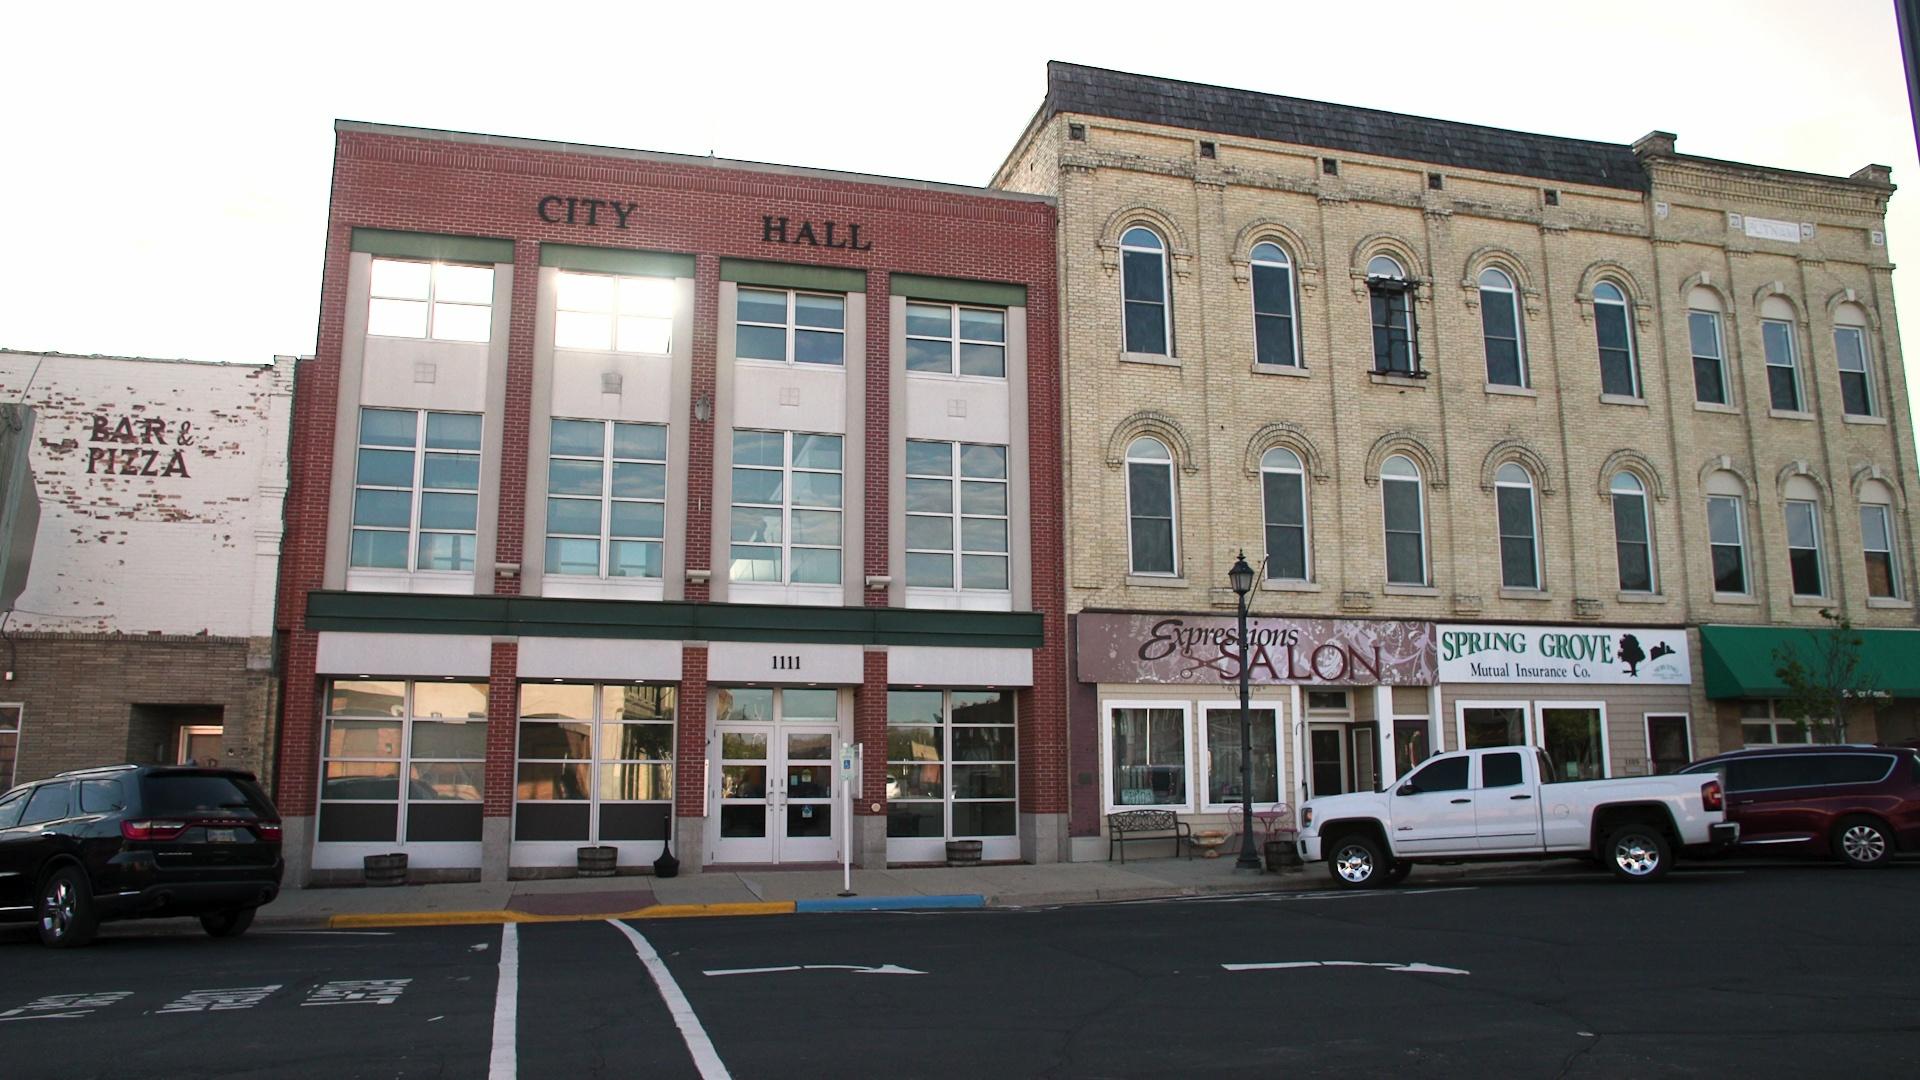 A view of the front of Brodhead's brick city hall, with cars parked in the foreground.